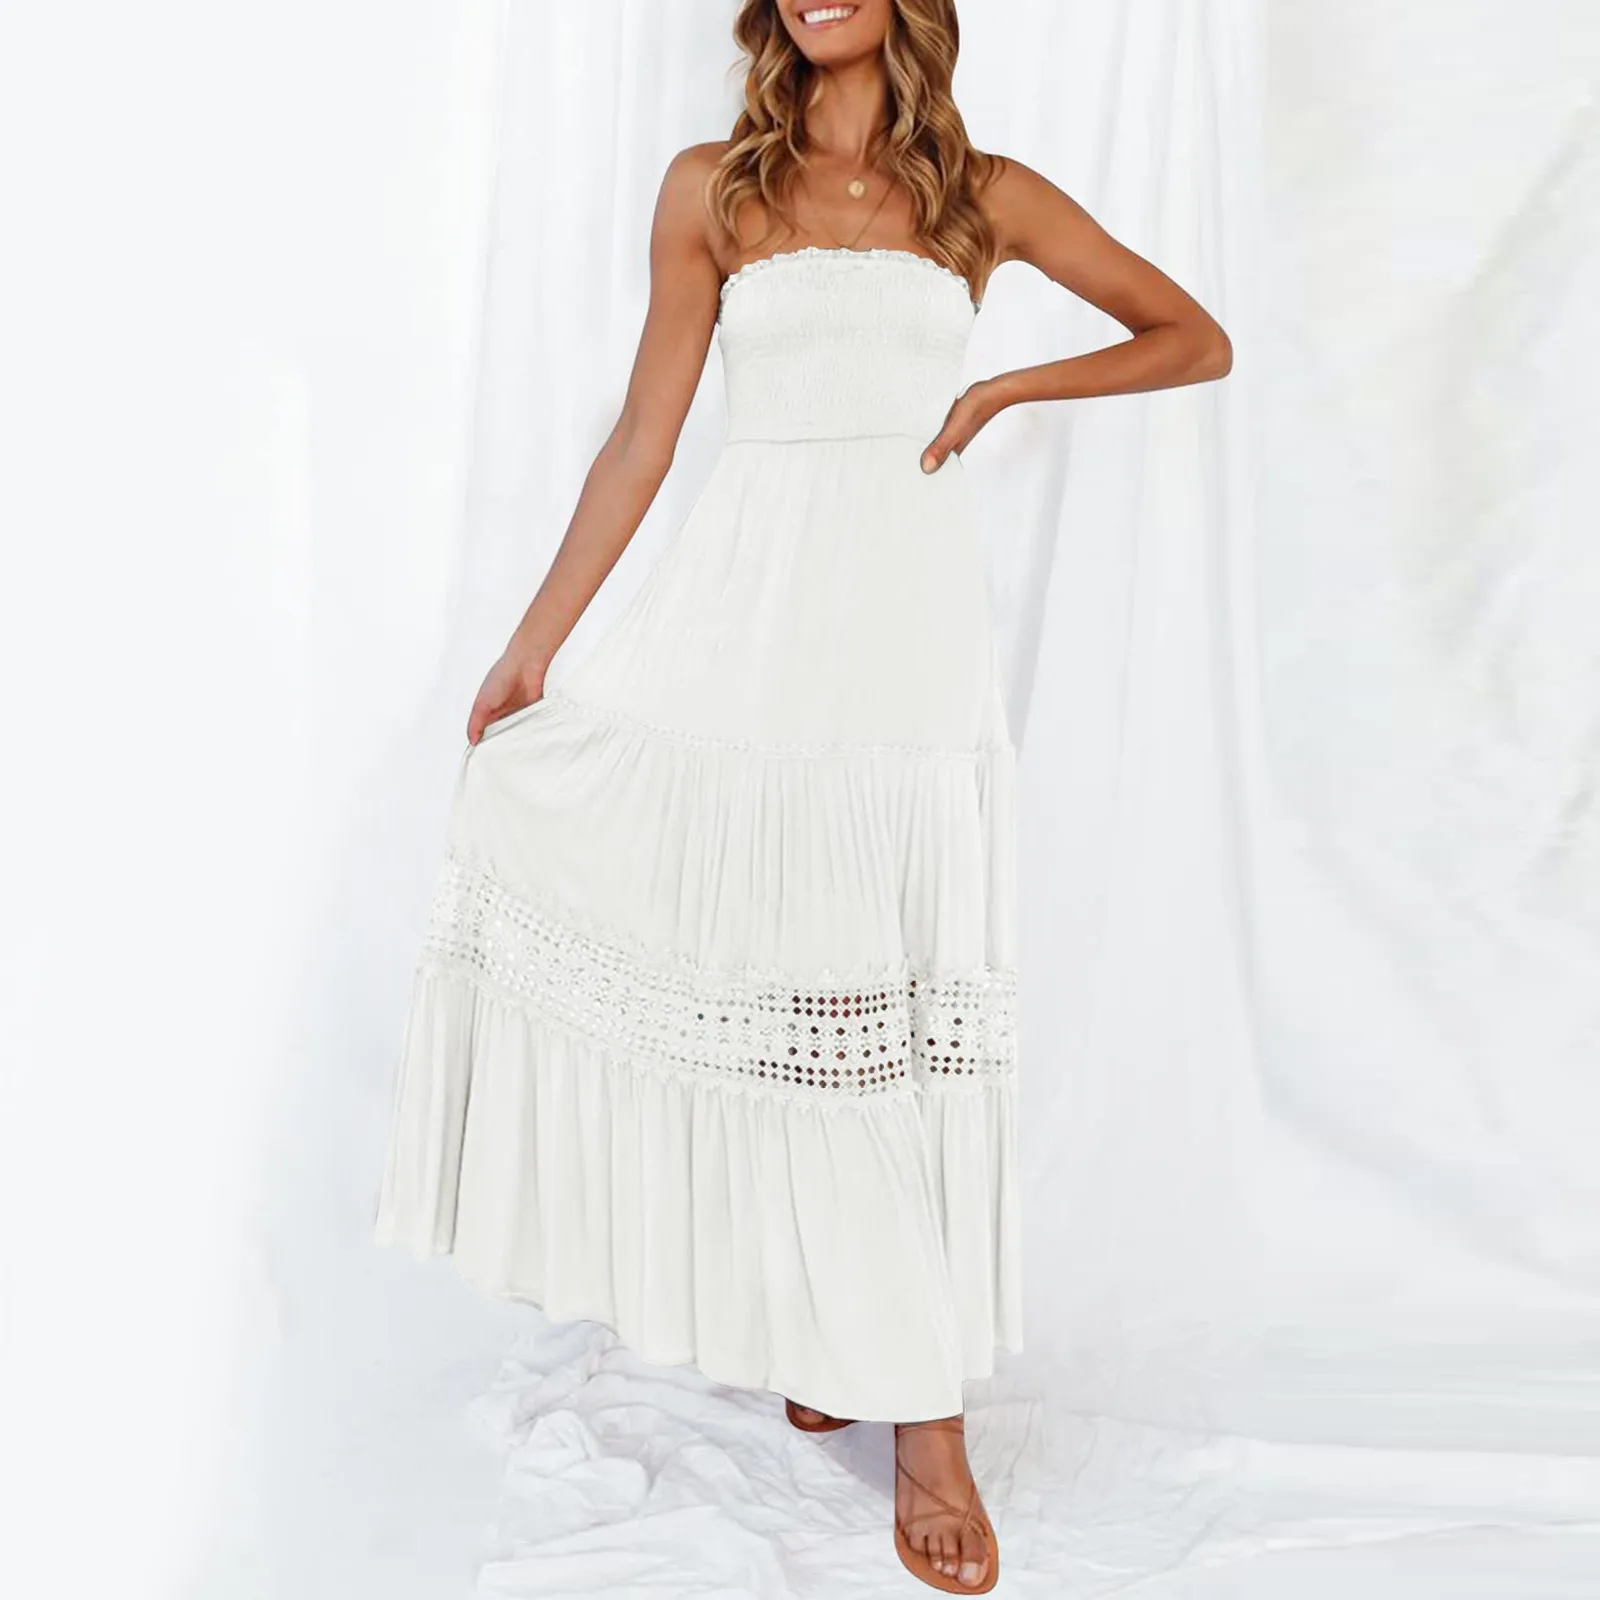 

Hook Flower Hollowed Beach Chest Wrapped Dress Women Slim Elegant Pleated Dresses Sleeveless High Waisted Solid Color Dress